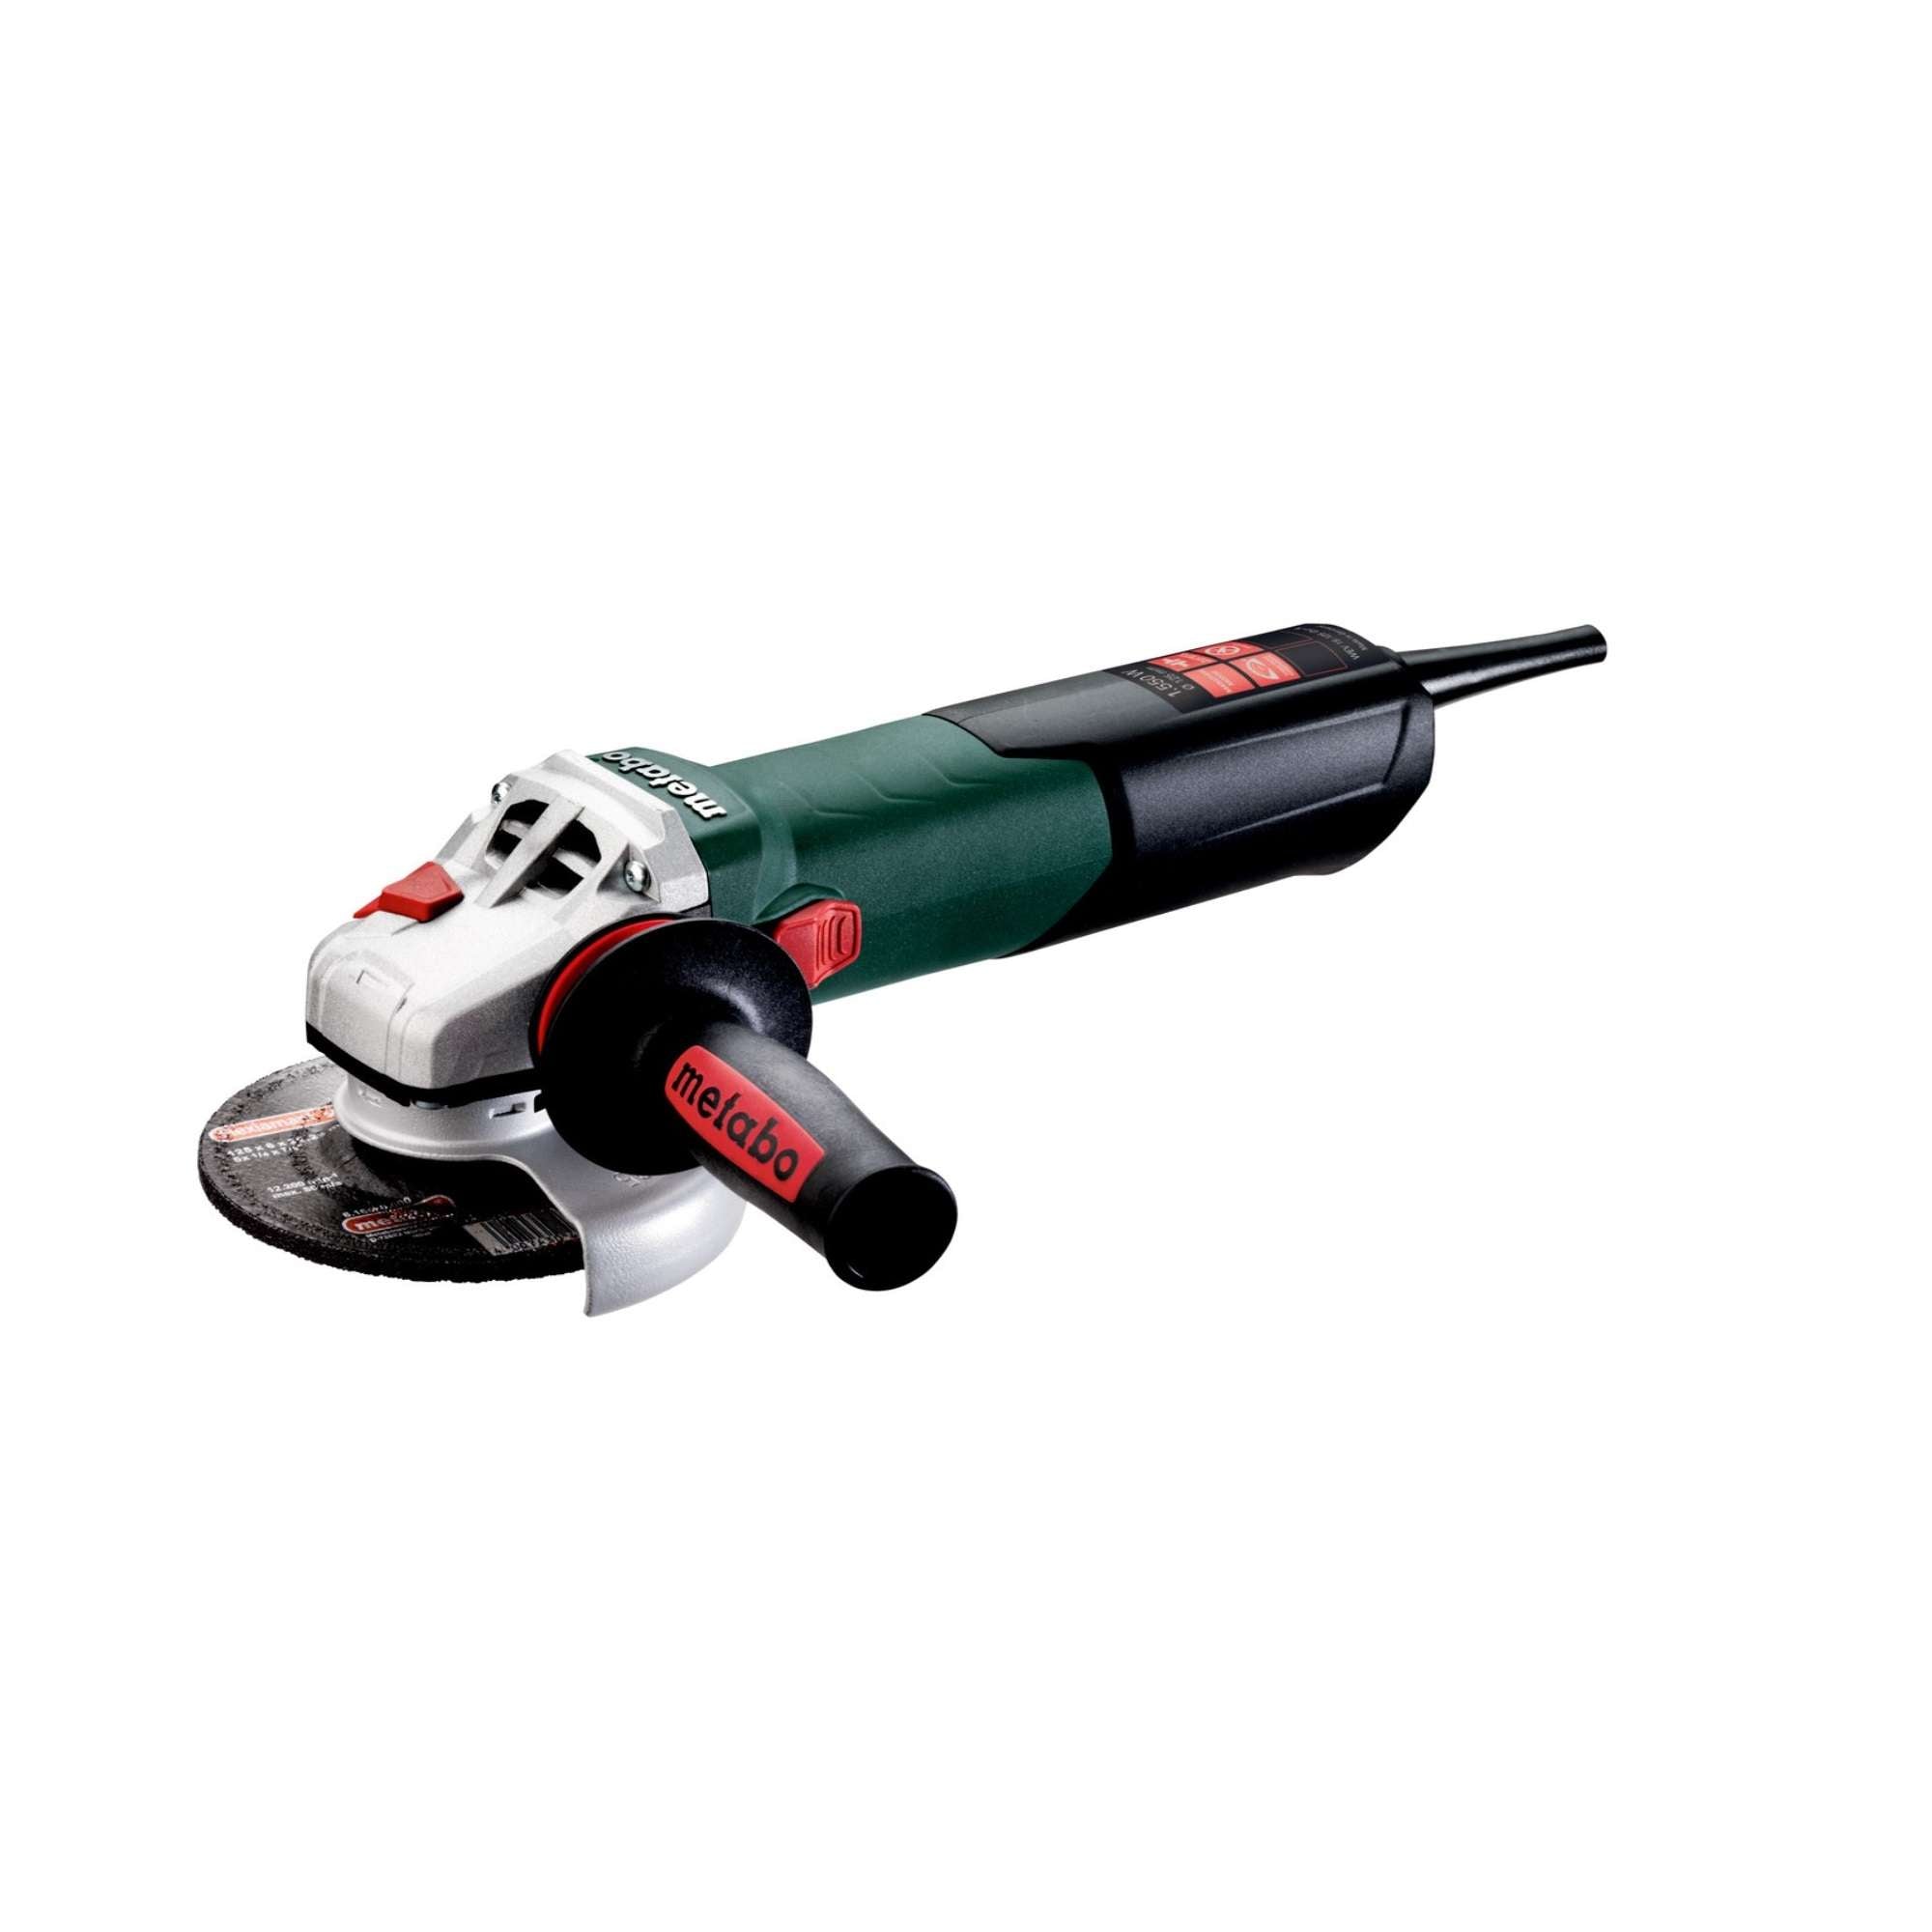 Angle grinder 125mm 1550W - Metabo WEV 15-125 Quick 600468000